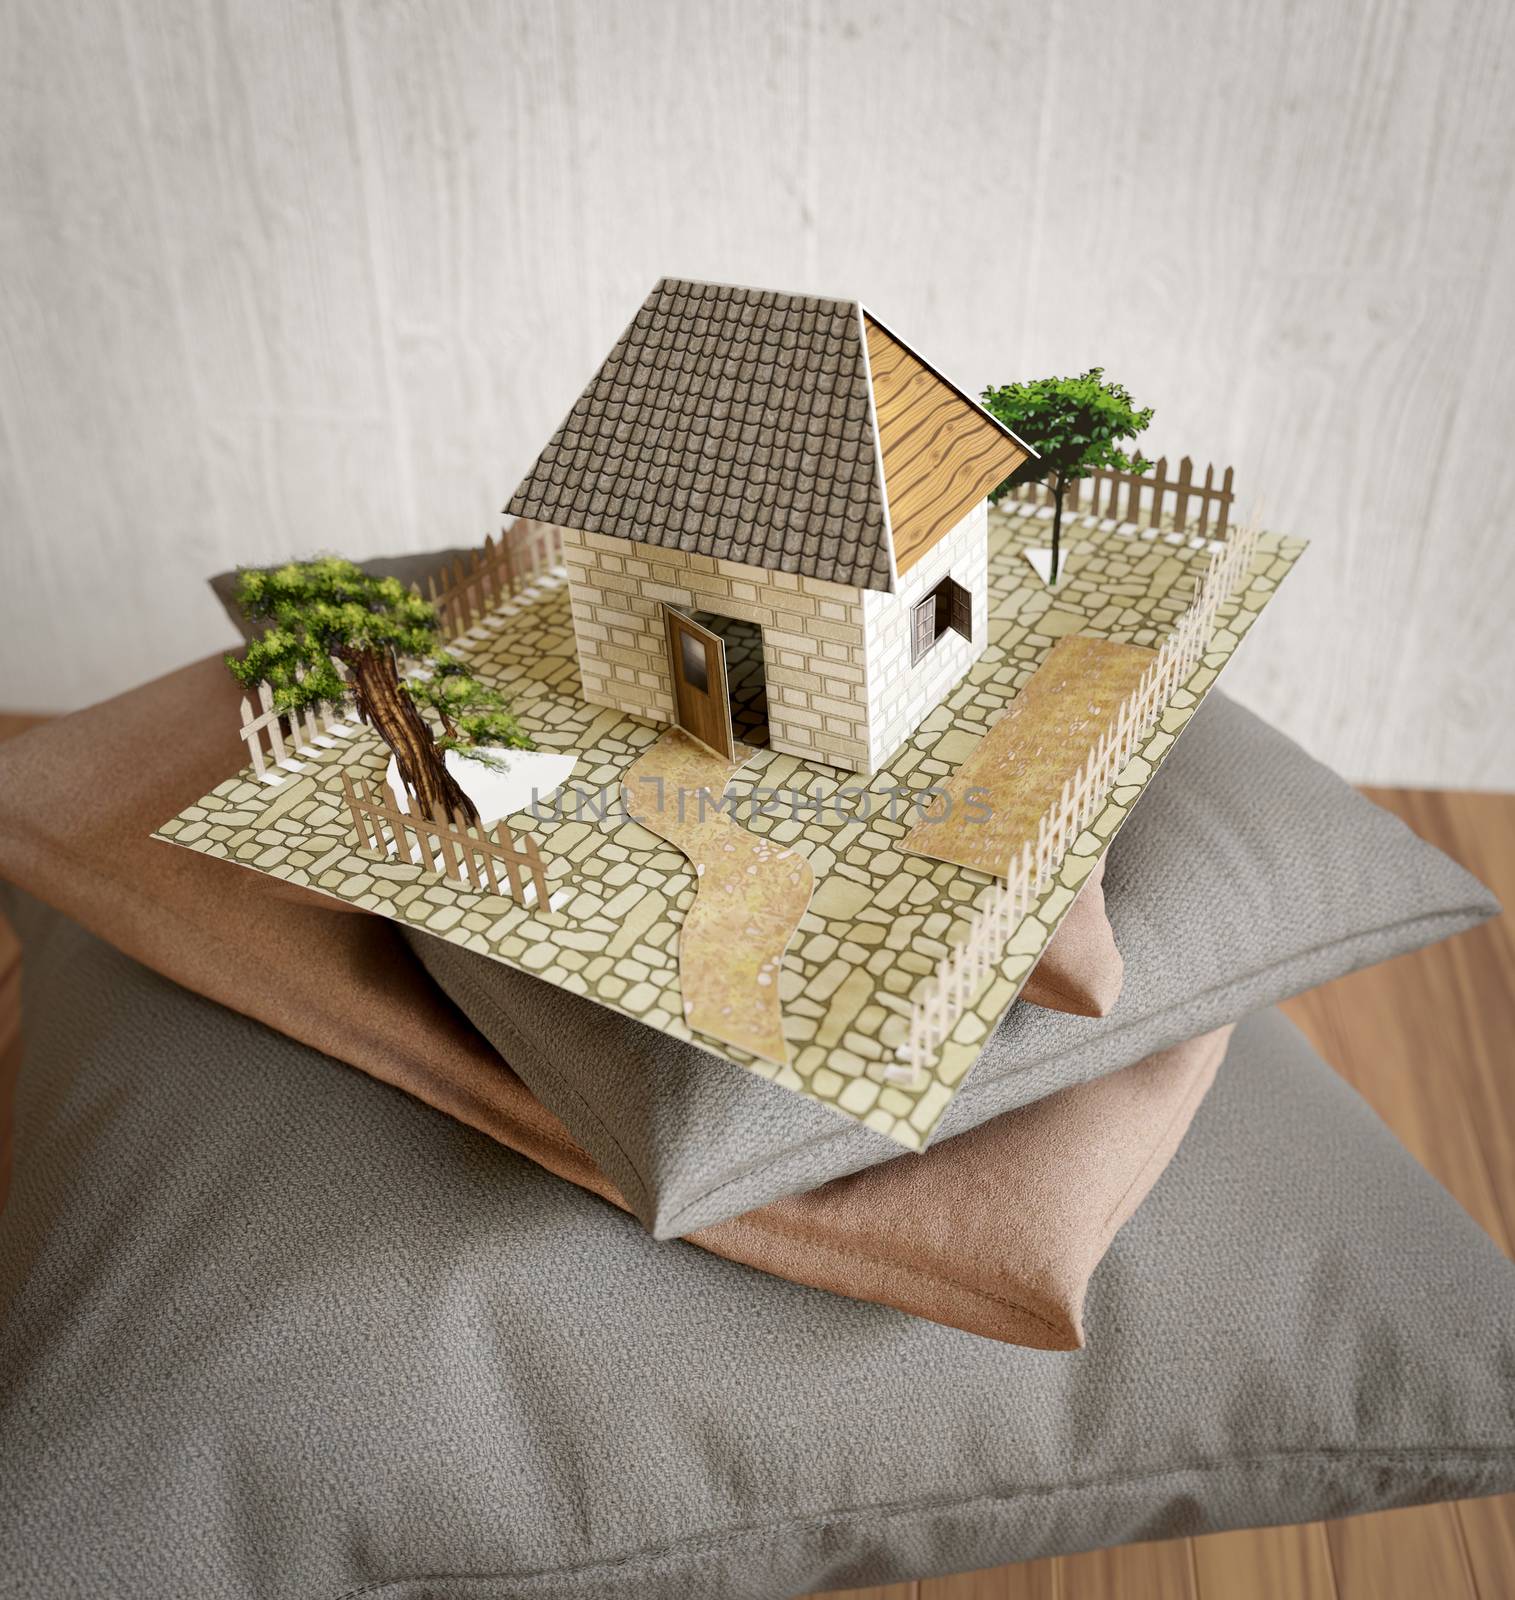 pillows collection and toy house from paper concept composition